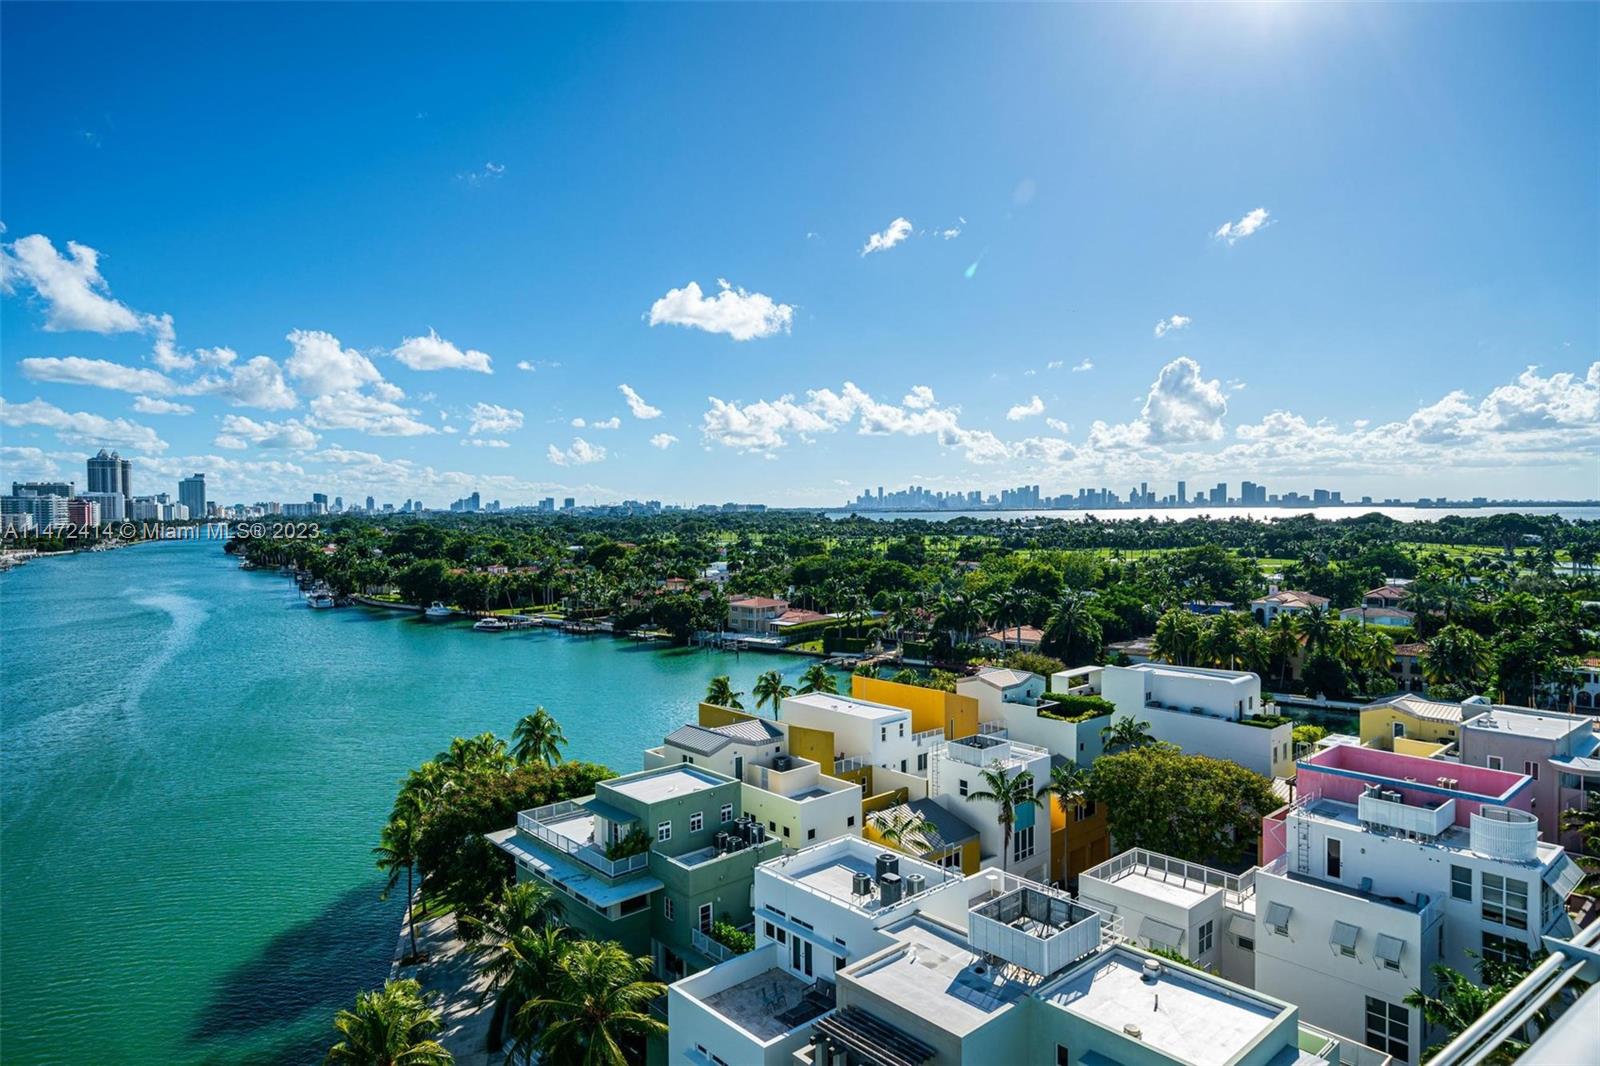 Enjoy luxury living at Aqua Gorlin, Allison Island! This spacious and upgraded 4 bed/4.5 bath fully furnished unit offers a bulthaup kitchen, subzero refrigerator, gaggenau & thermador appliances. Custom renovation throughout to include bathrooms, lighting, closets, built-ins and doors.  Enjoy breathtaking ocean, inter-coastal and Miami skyline views from a wrap-around corner balcony. The 8.5 acres private island situated in the Heart of Miami Beach close to fine dining and shopping. Boutique building with only 29 residences. Enjoy luxury amenities including a north and south pool, state of the art fitness center and spa, child's play area, coffee shop, 24 hours valet, 24 hours security. Includes 2 assigned parking spaces, Annual lease only.